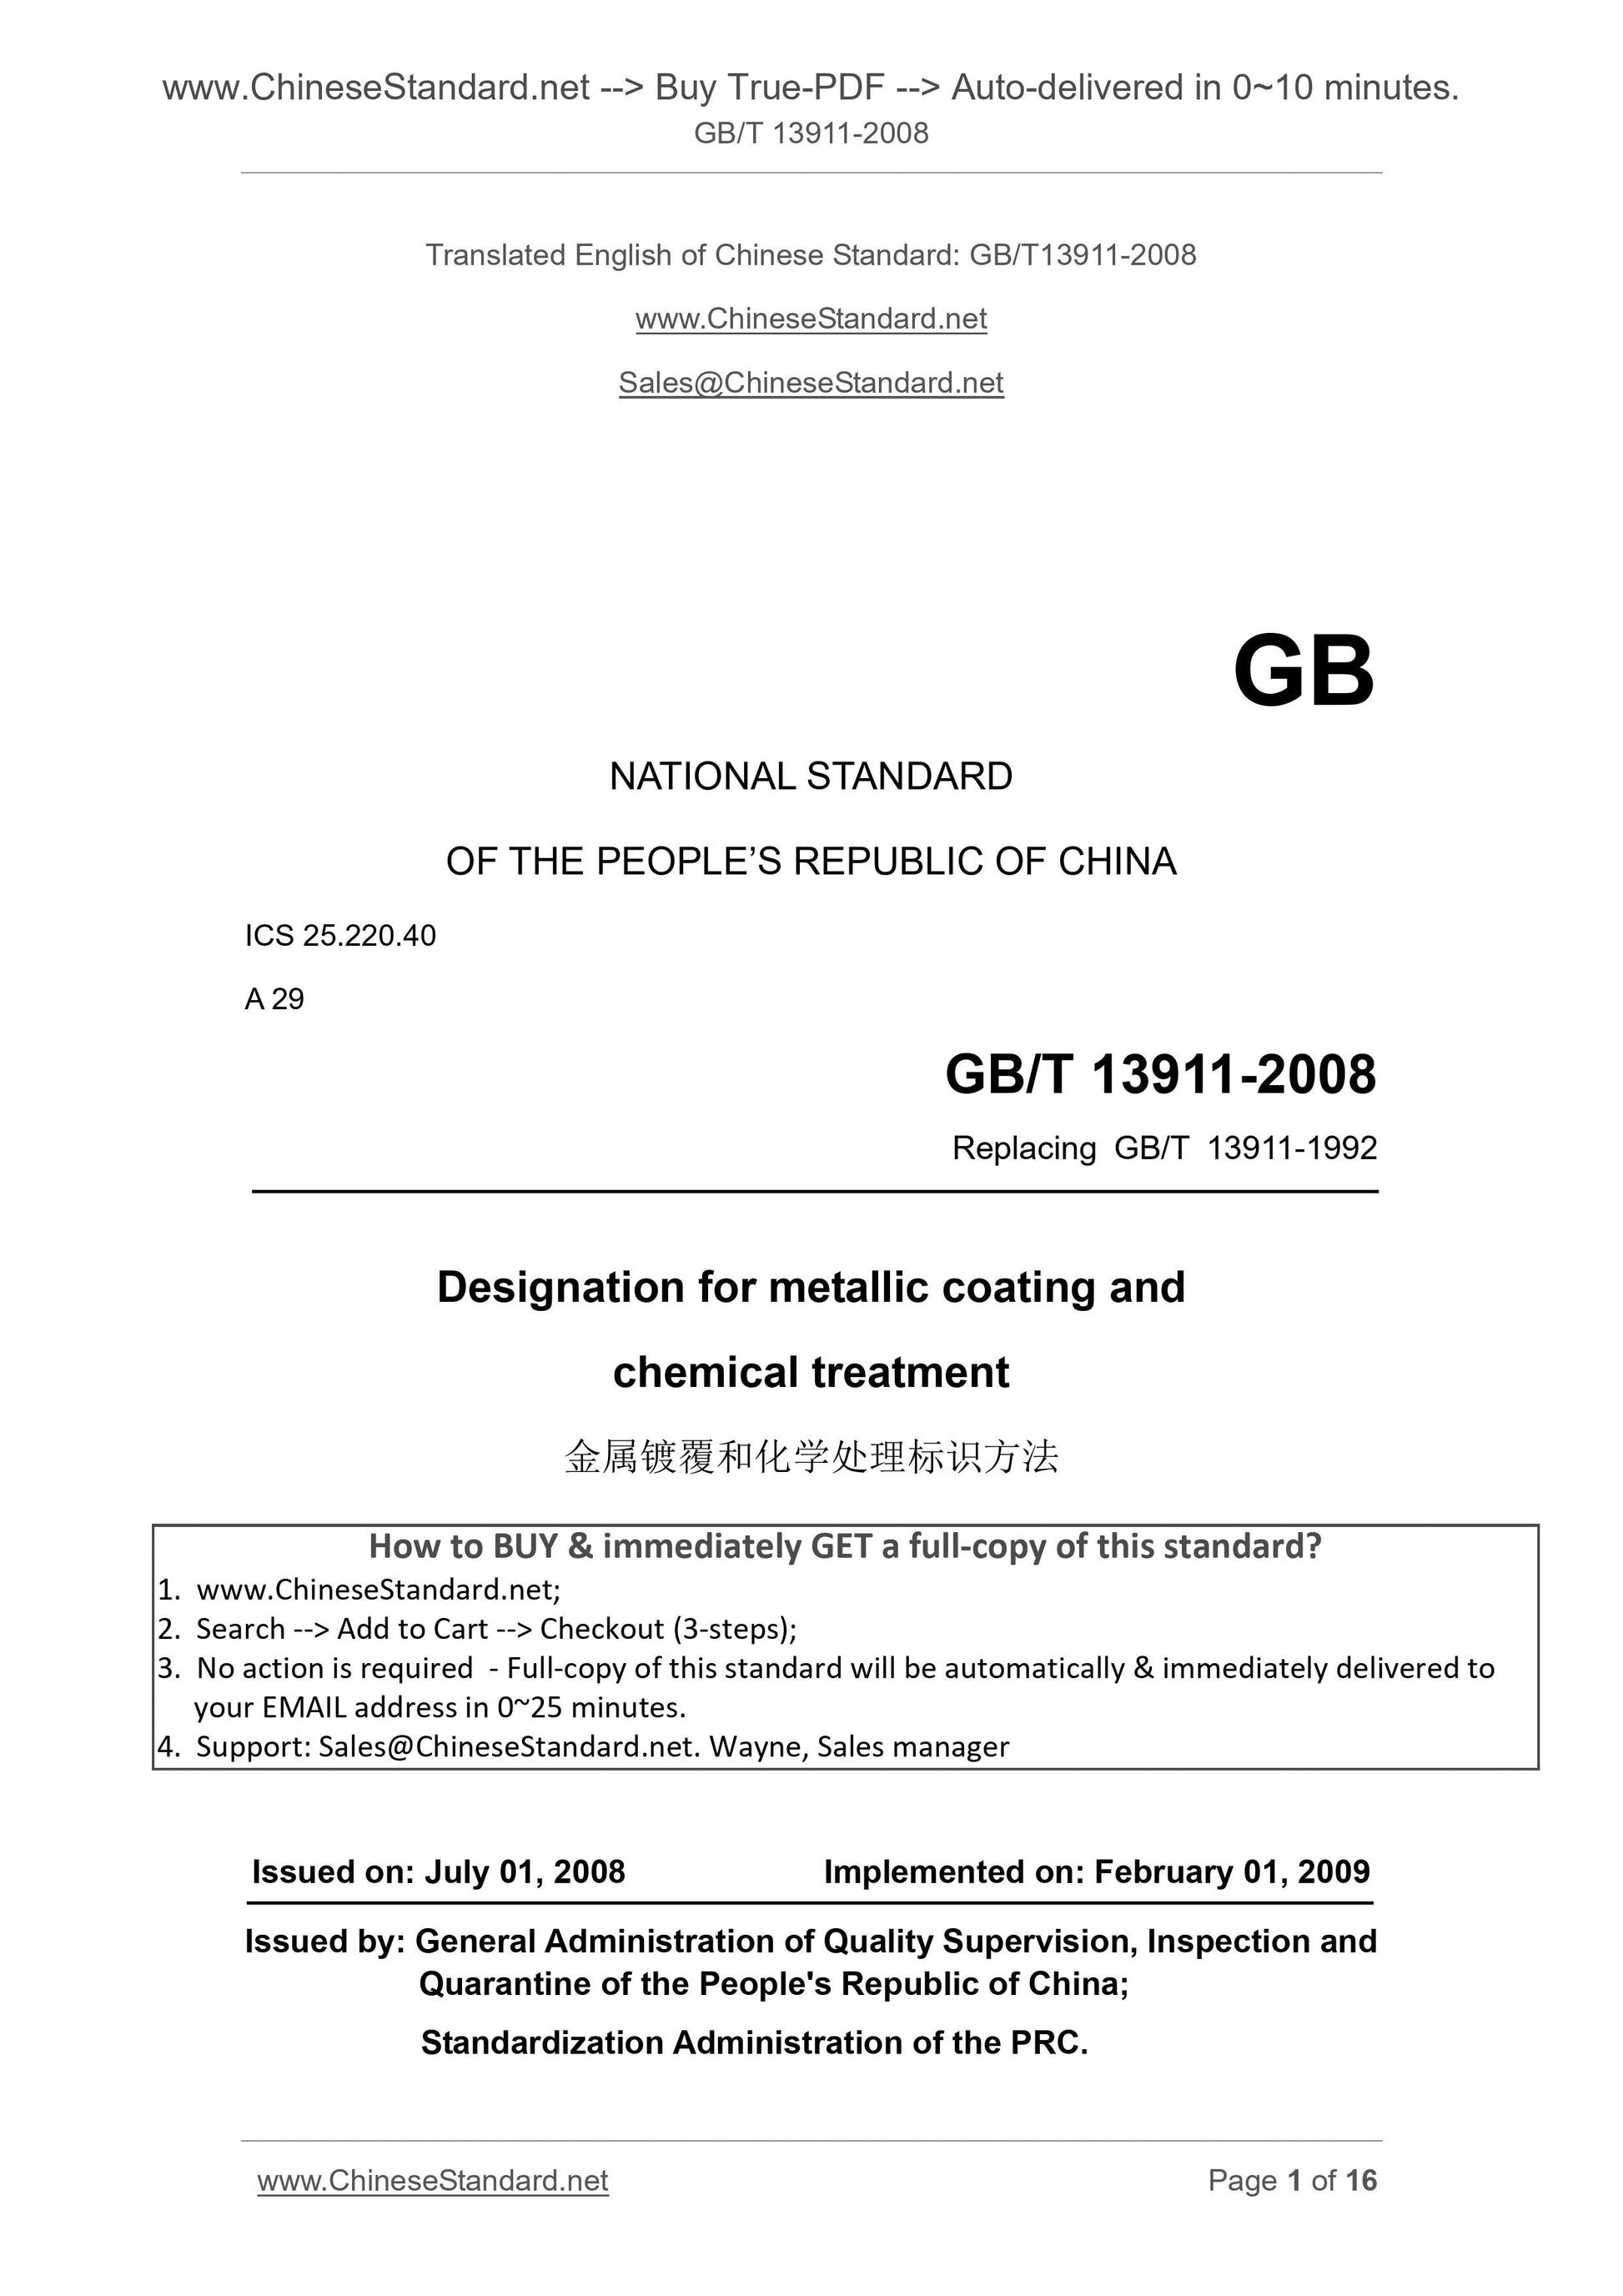 GB/T 13911-2008 Page 1